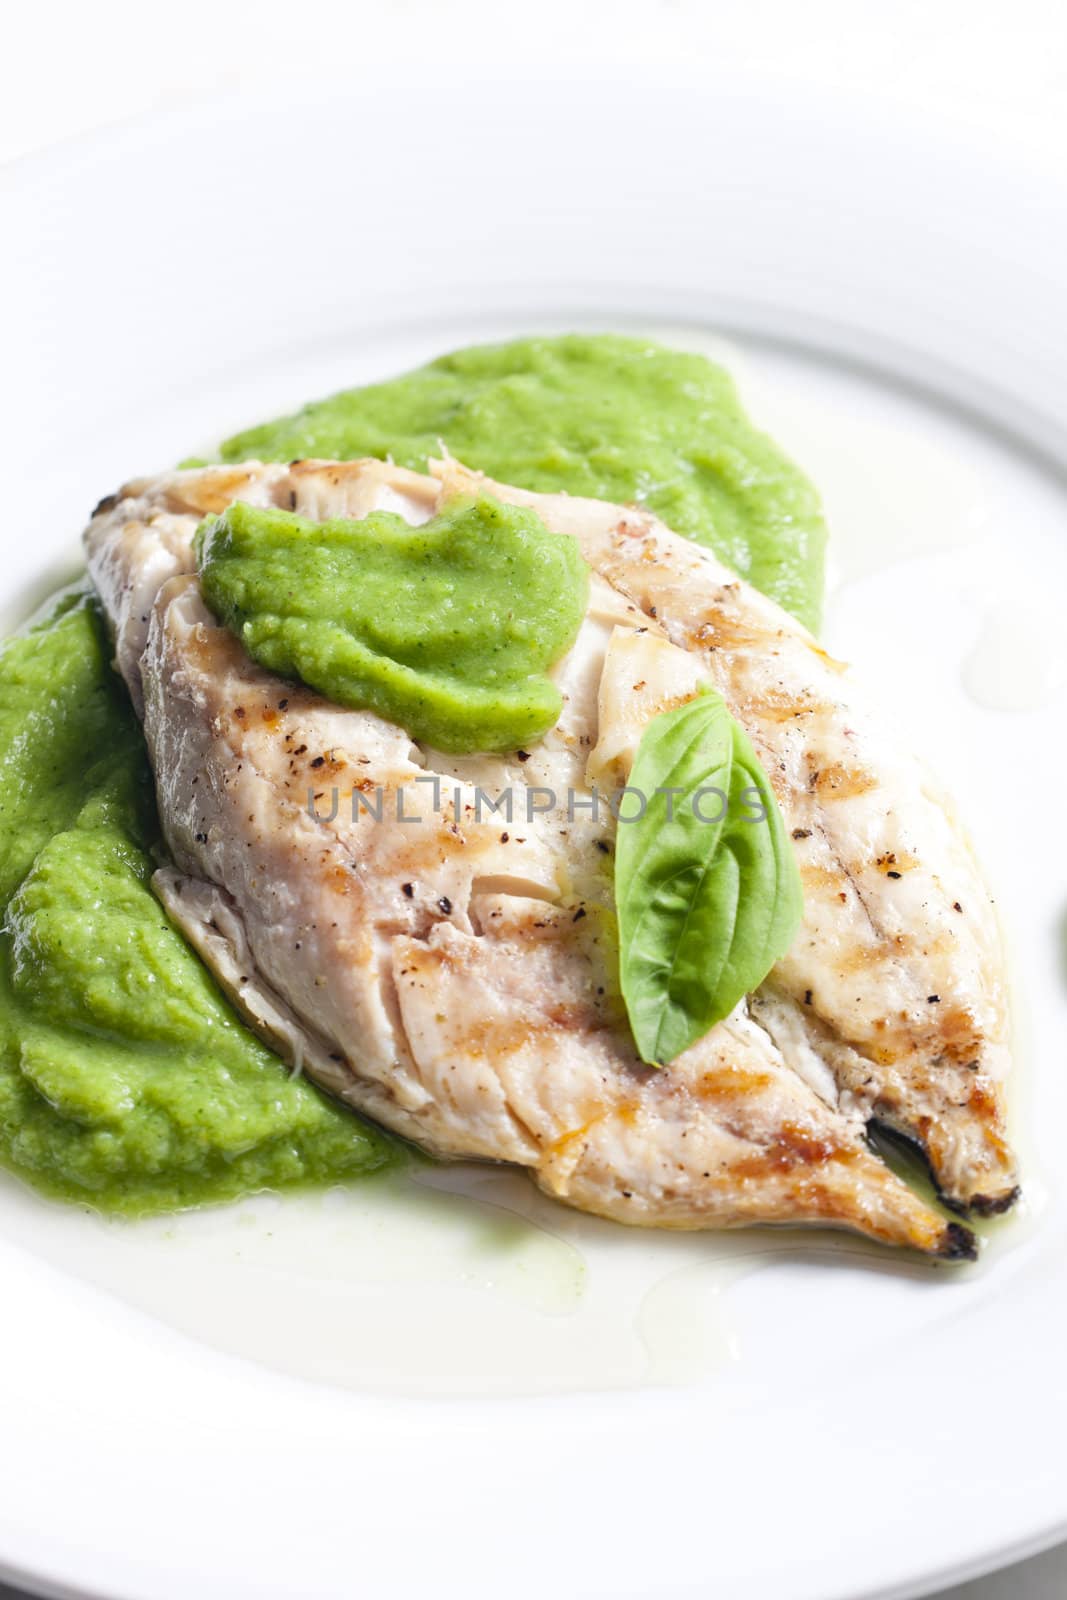 grilled mackerel with mashed pea and basil by phbcz